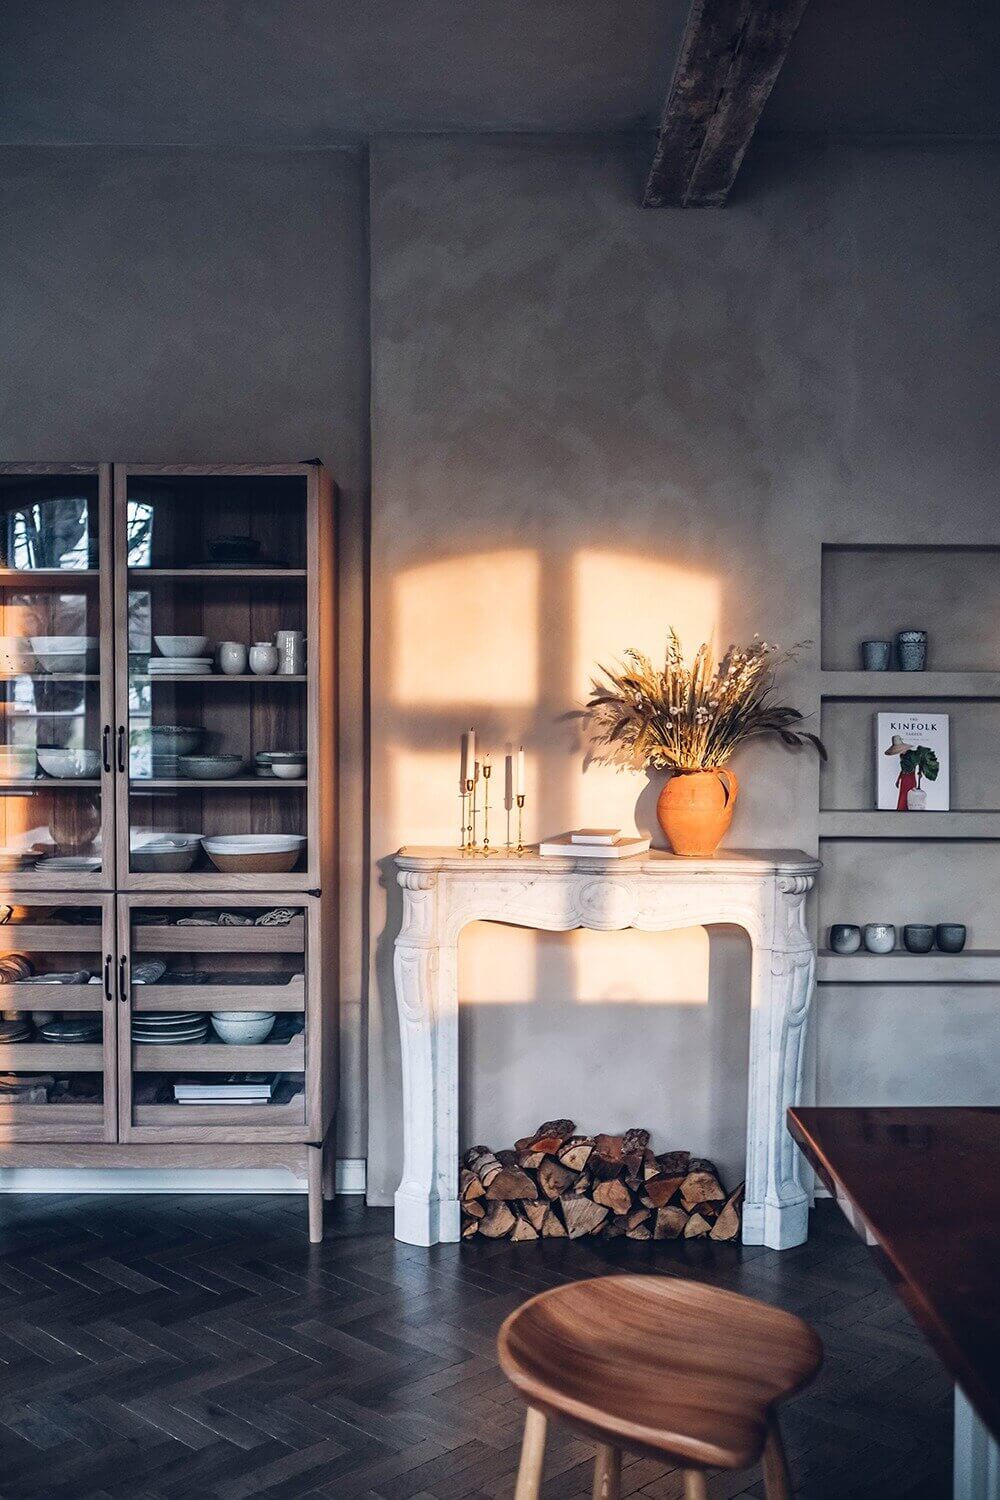 devol-kitchen-our-food-stories-renovated-schoolhouse-germany-nordroom